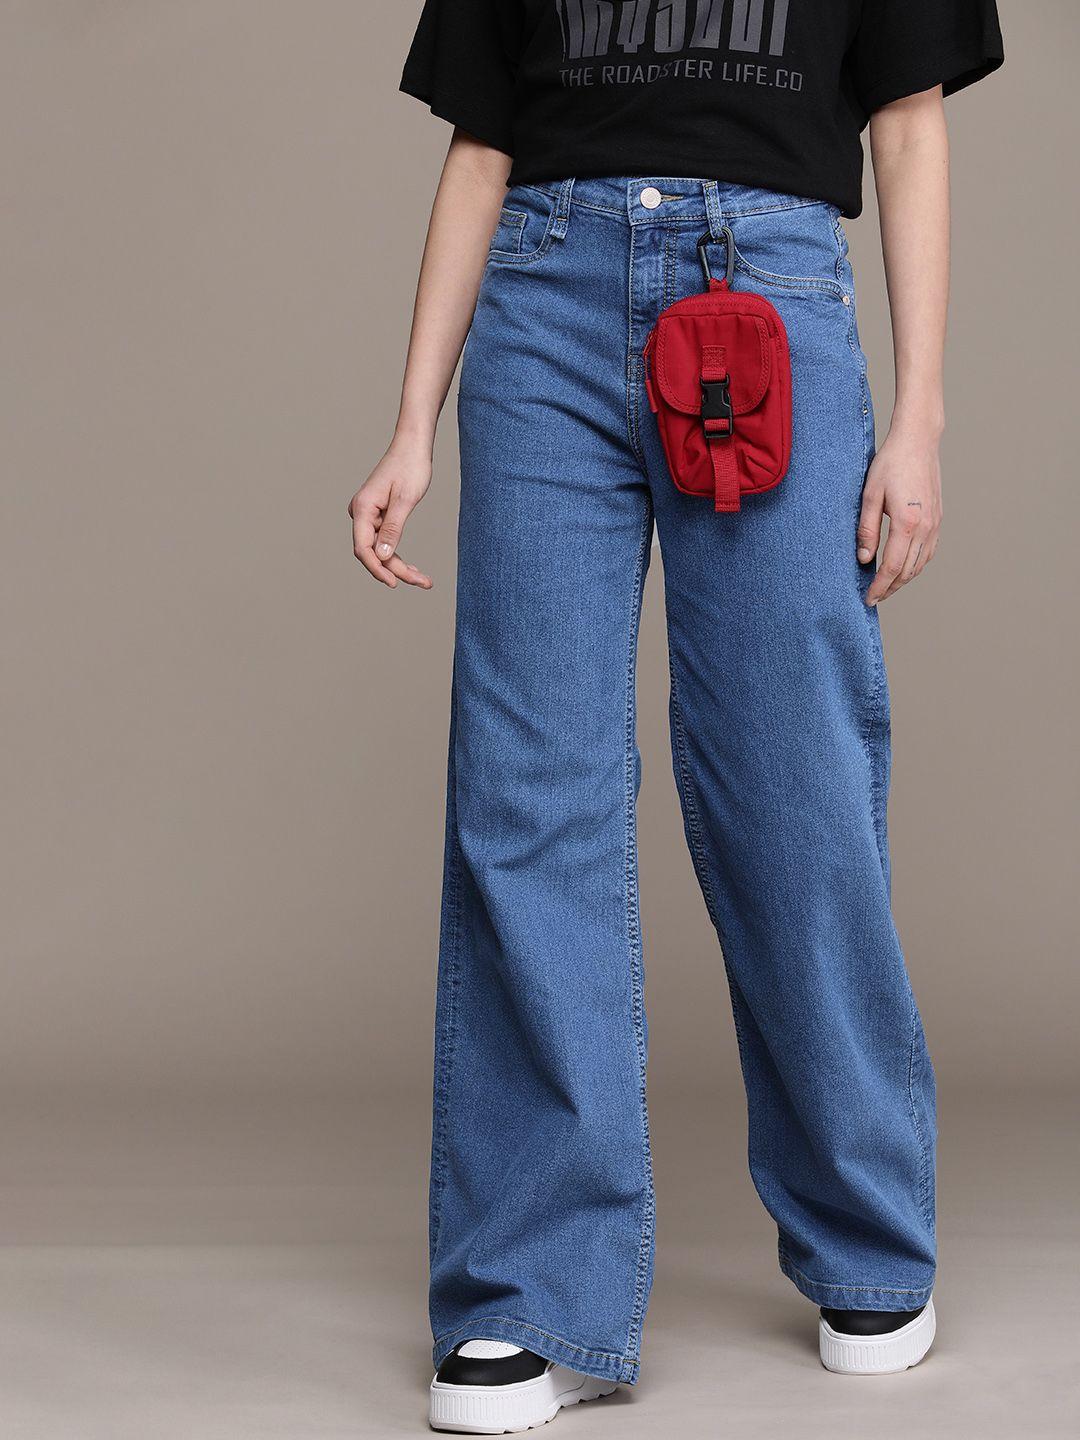 The Roadster Life Co. Women Wide Leg Stretchable Jeans